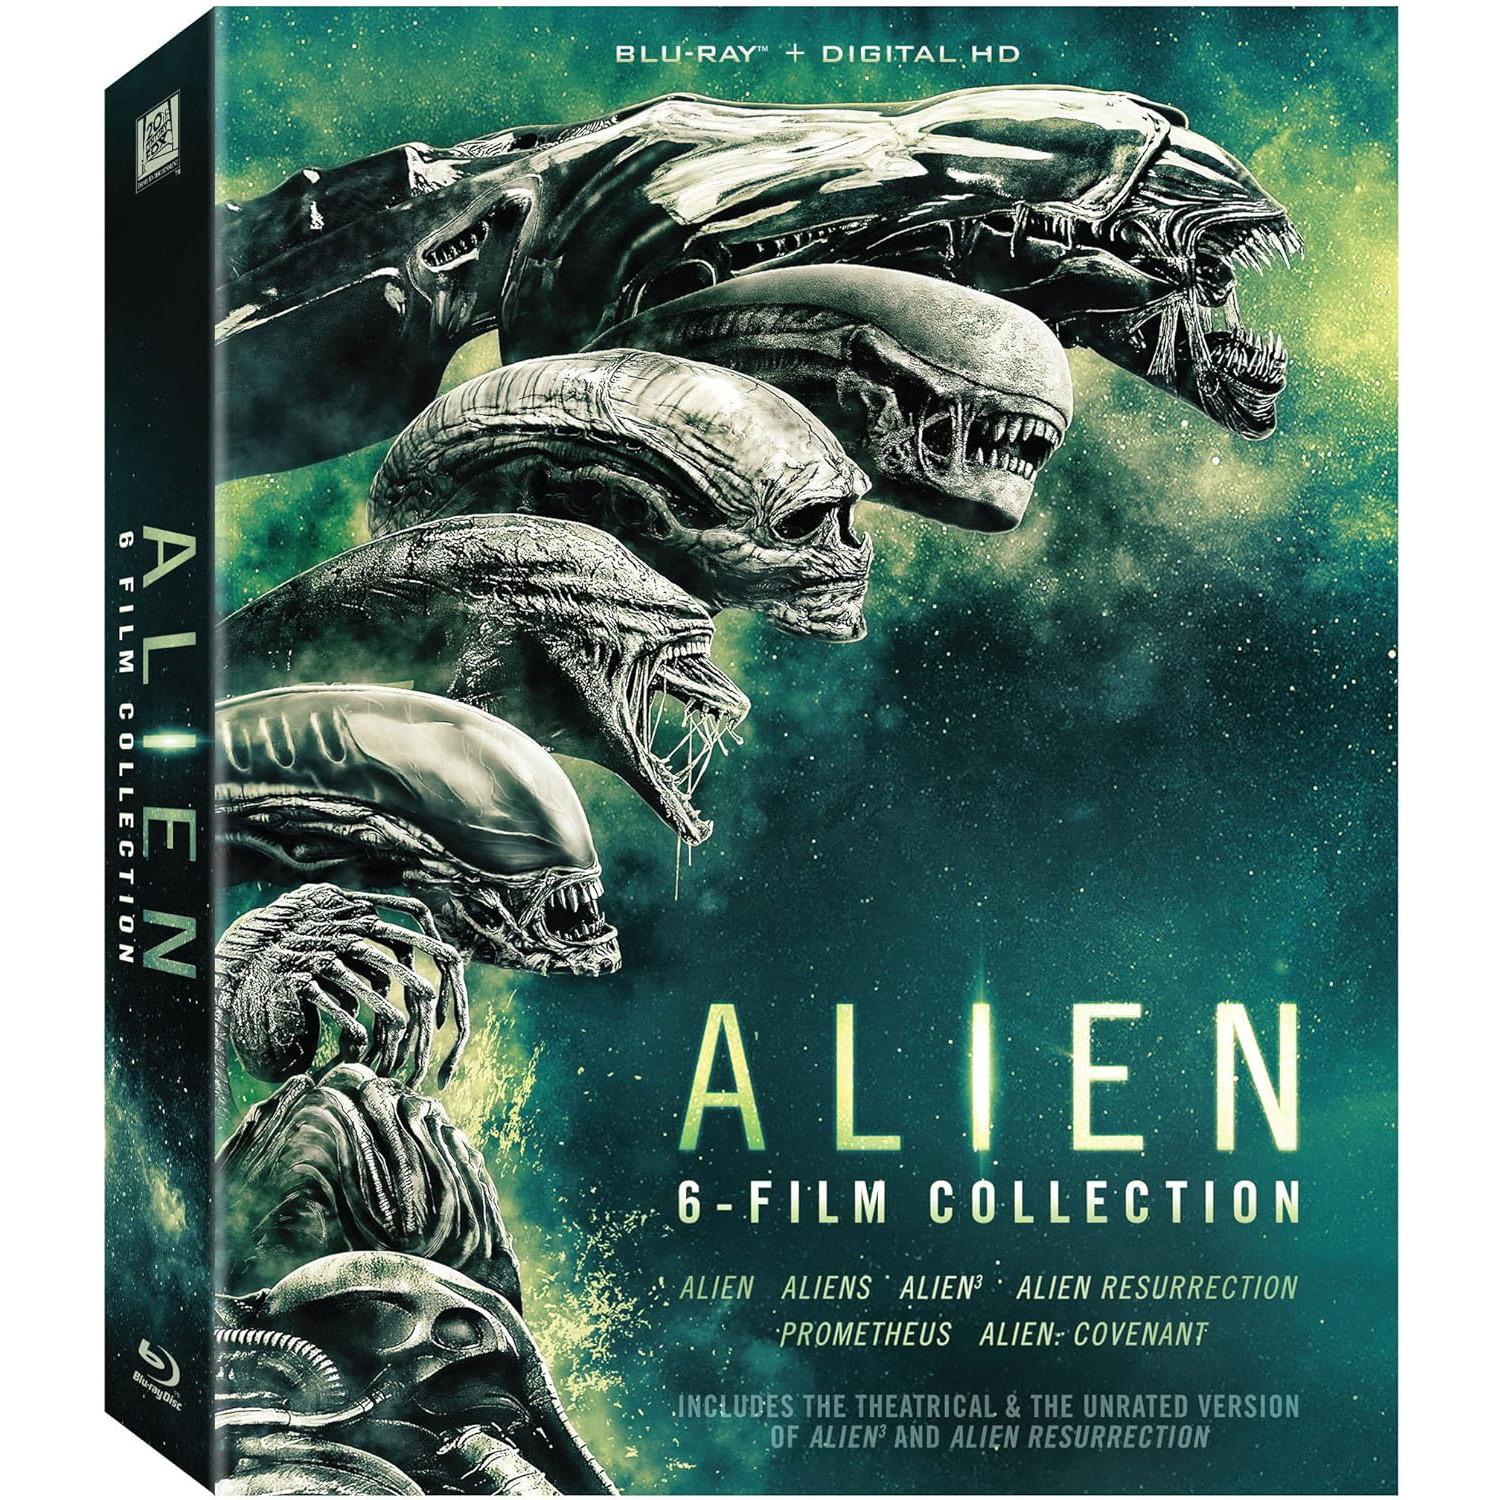 Alien 6-Film Collection Blu-ray + Digital HD for $19.99